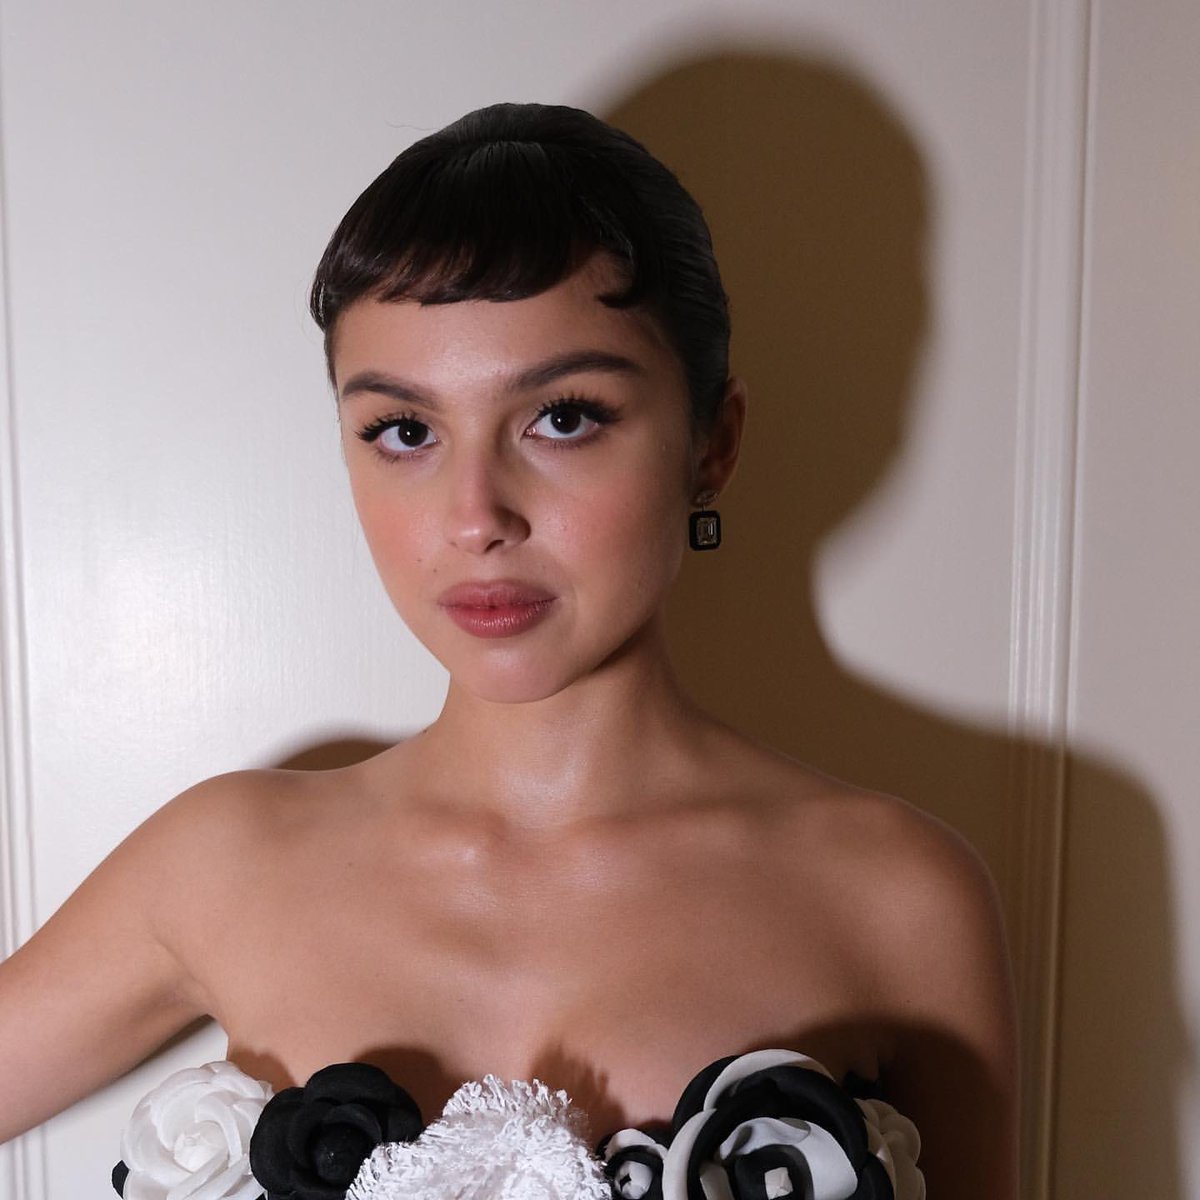 The queen her self Olivia Rodrigo just posted guys #MetGala2023 #metgala #MetGala2023 #OLIVIARODRIGO #AudreyHepburn #mtvceleb #MTVHottest #music #NYC